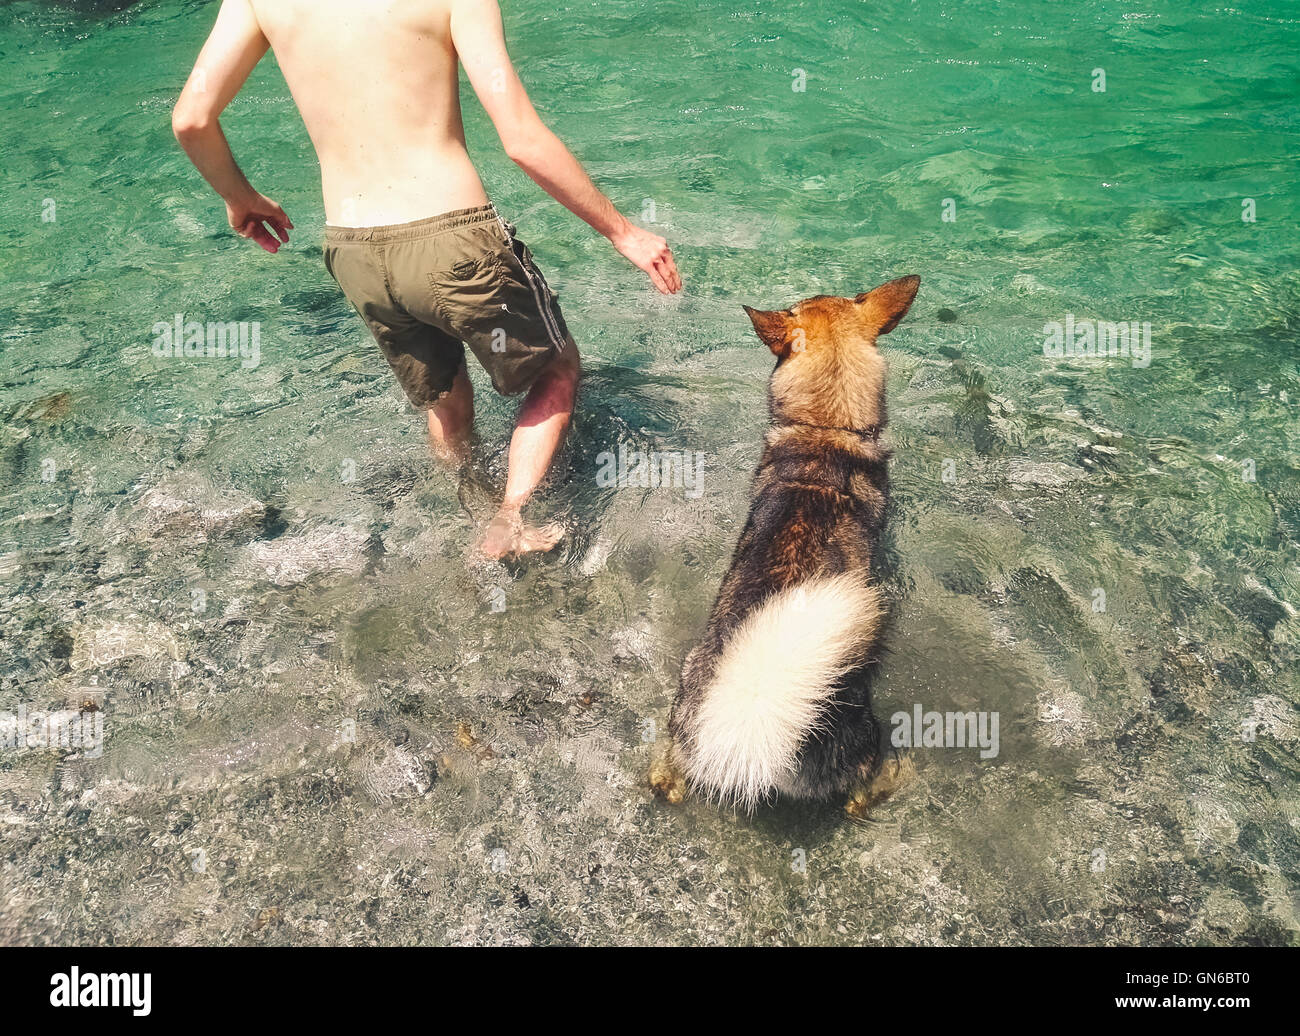 Man and dog entering into the waters Stock Photo